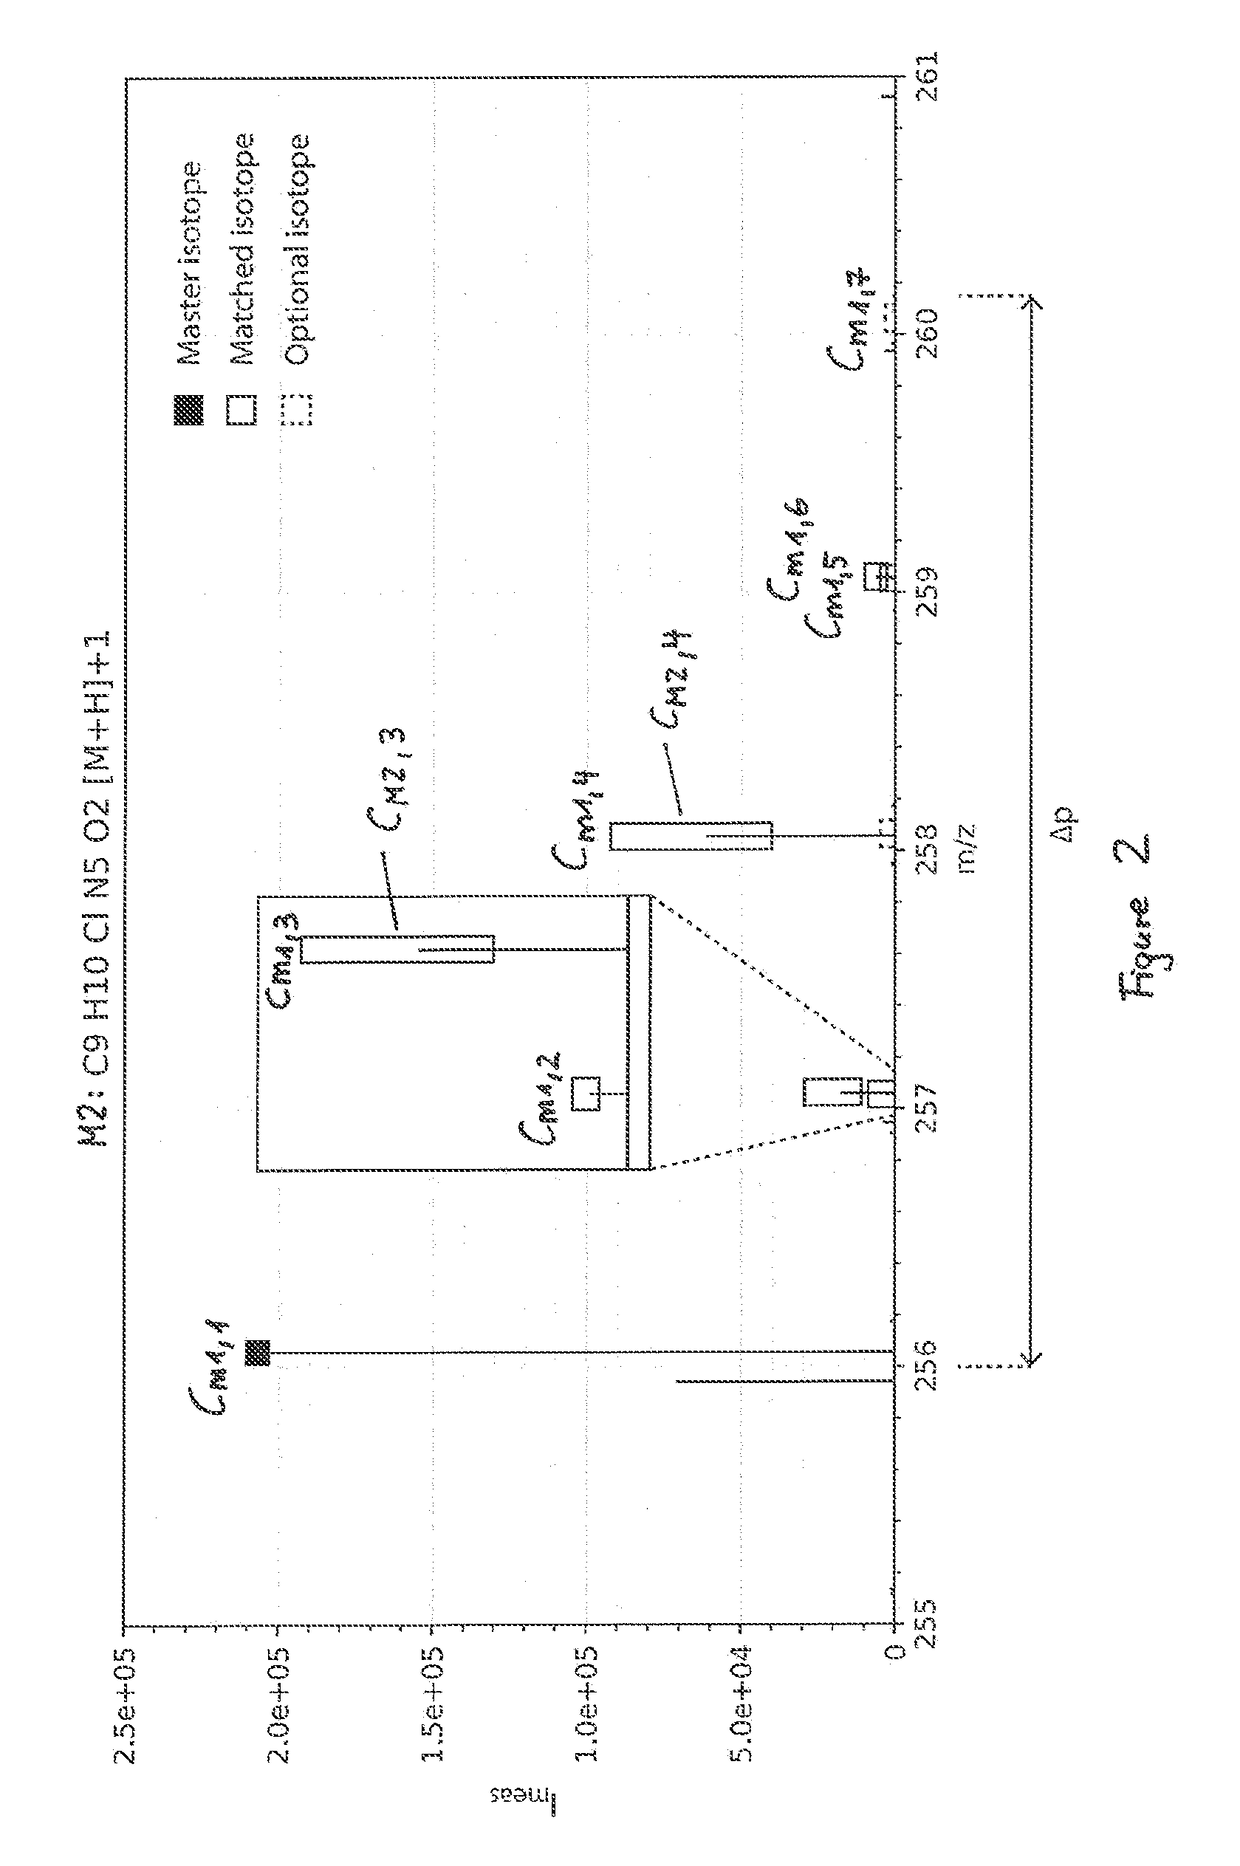 Method for identification of the elemental composition of species of molecules